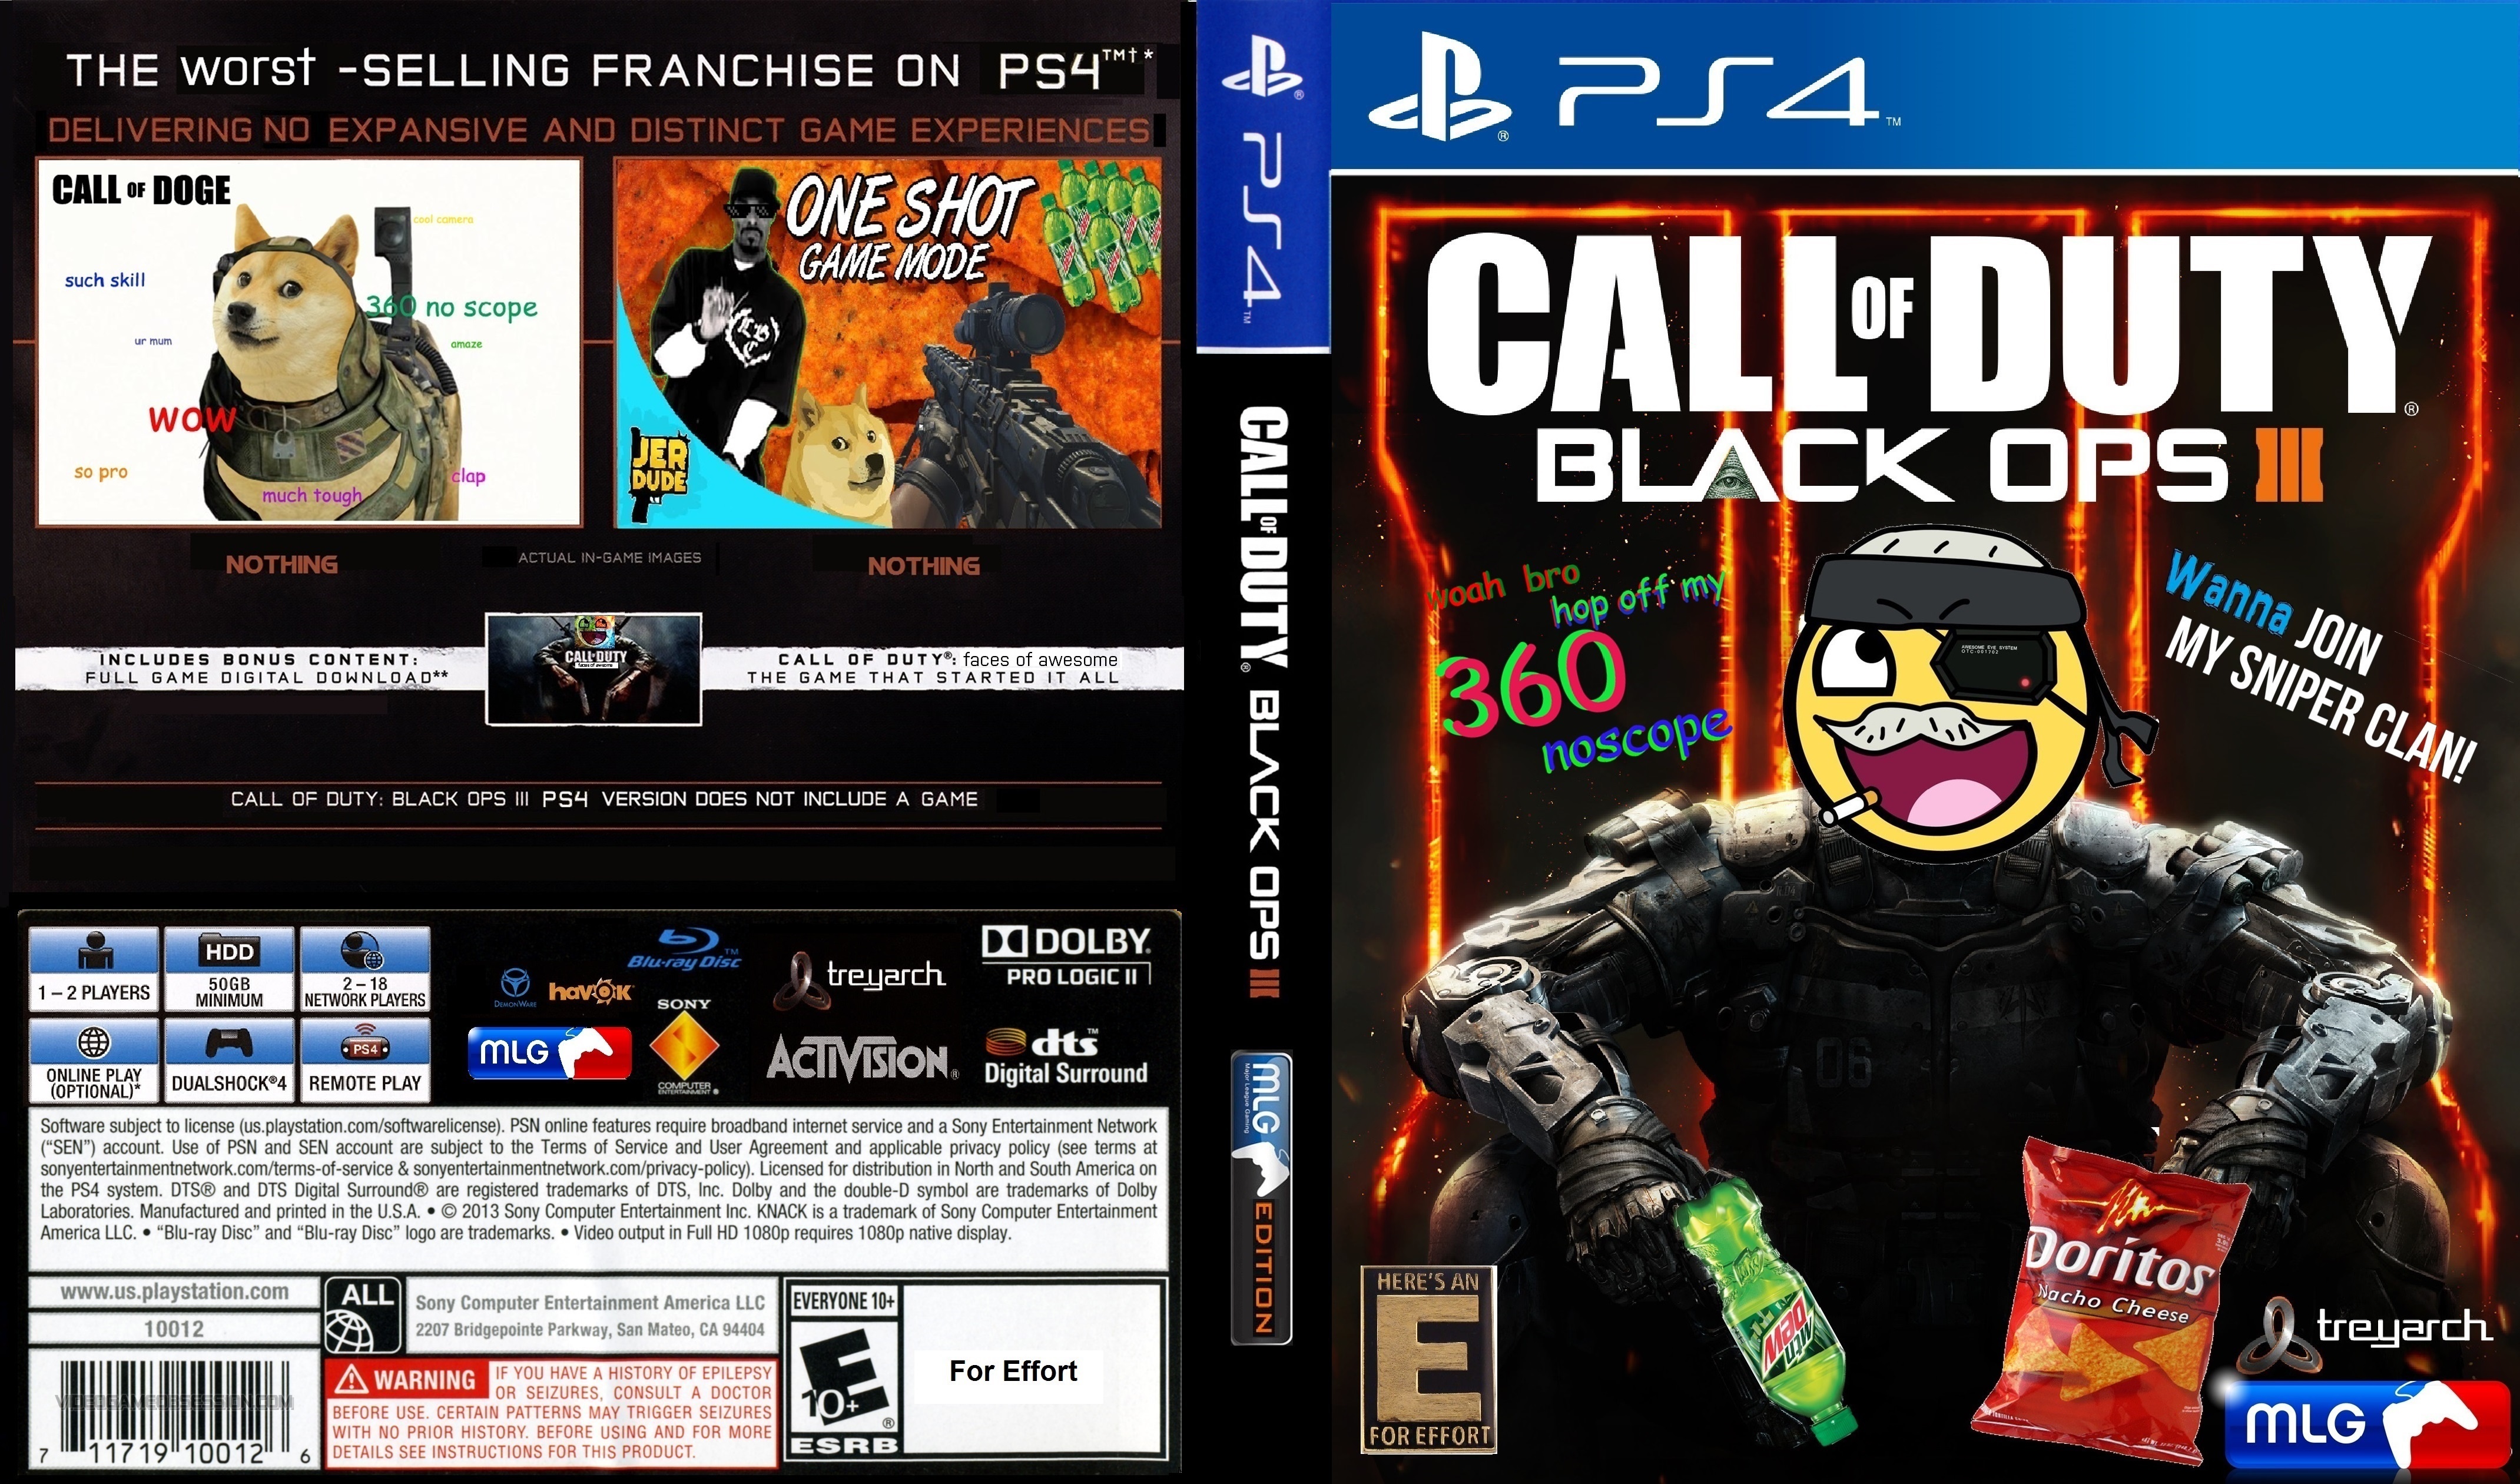 call of duty black ops 3 mlg box cover